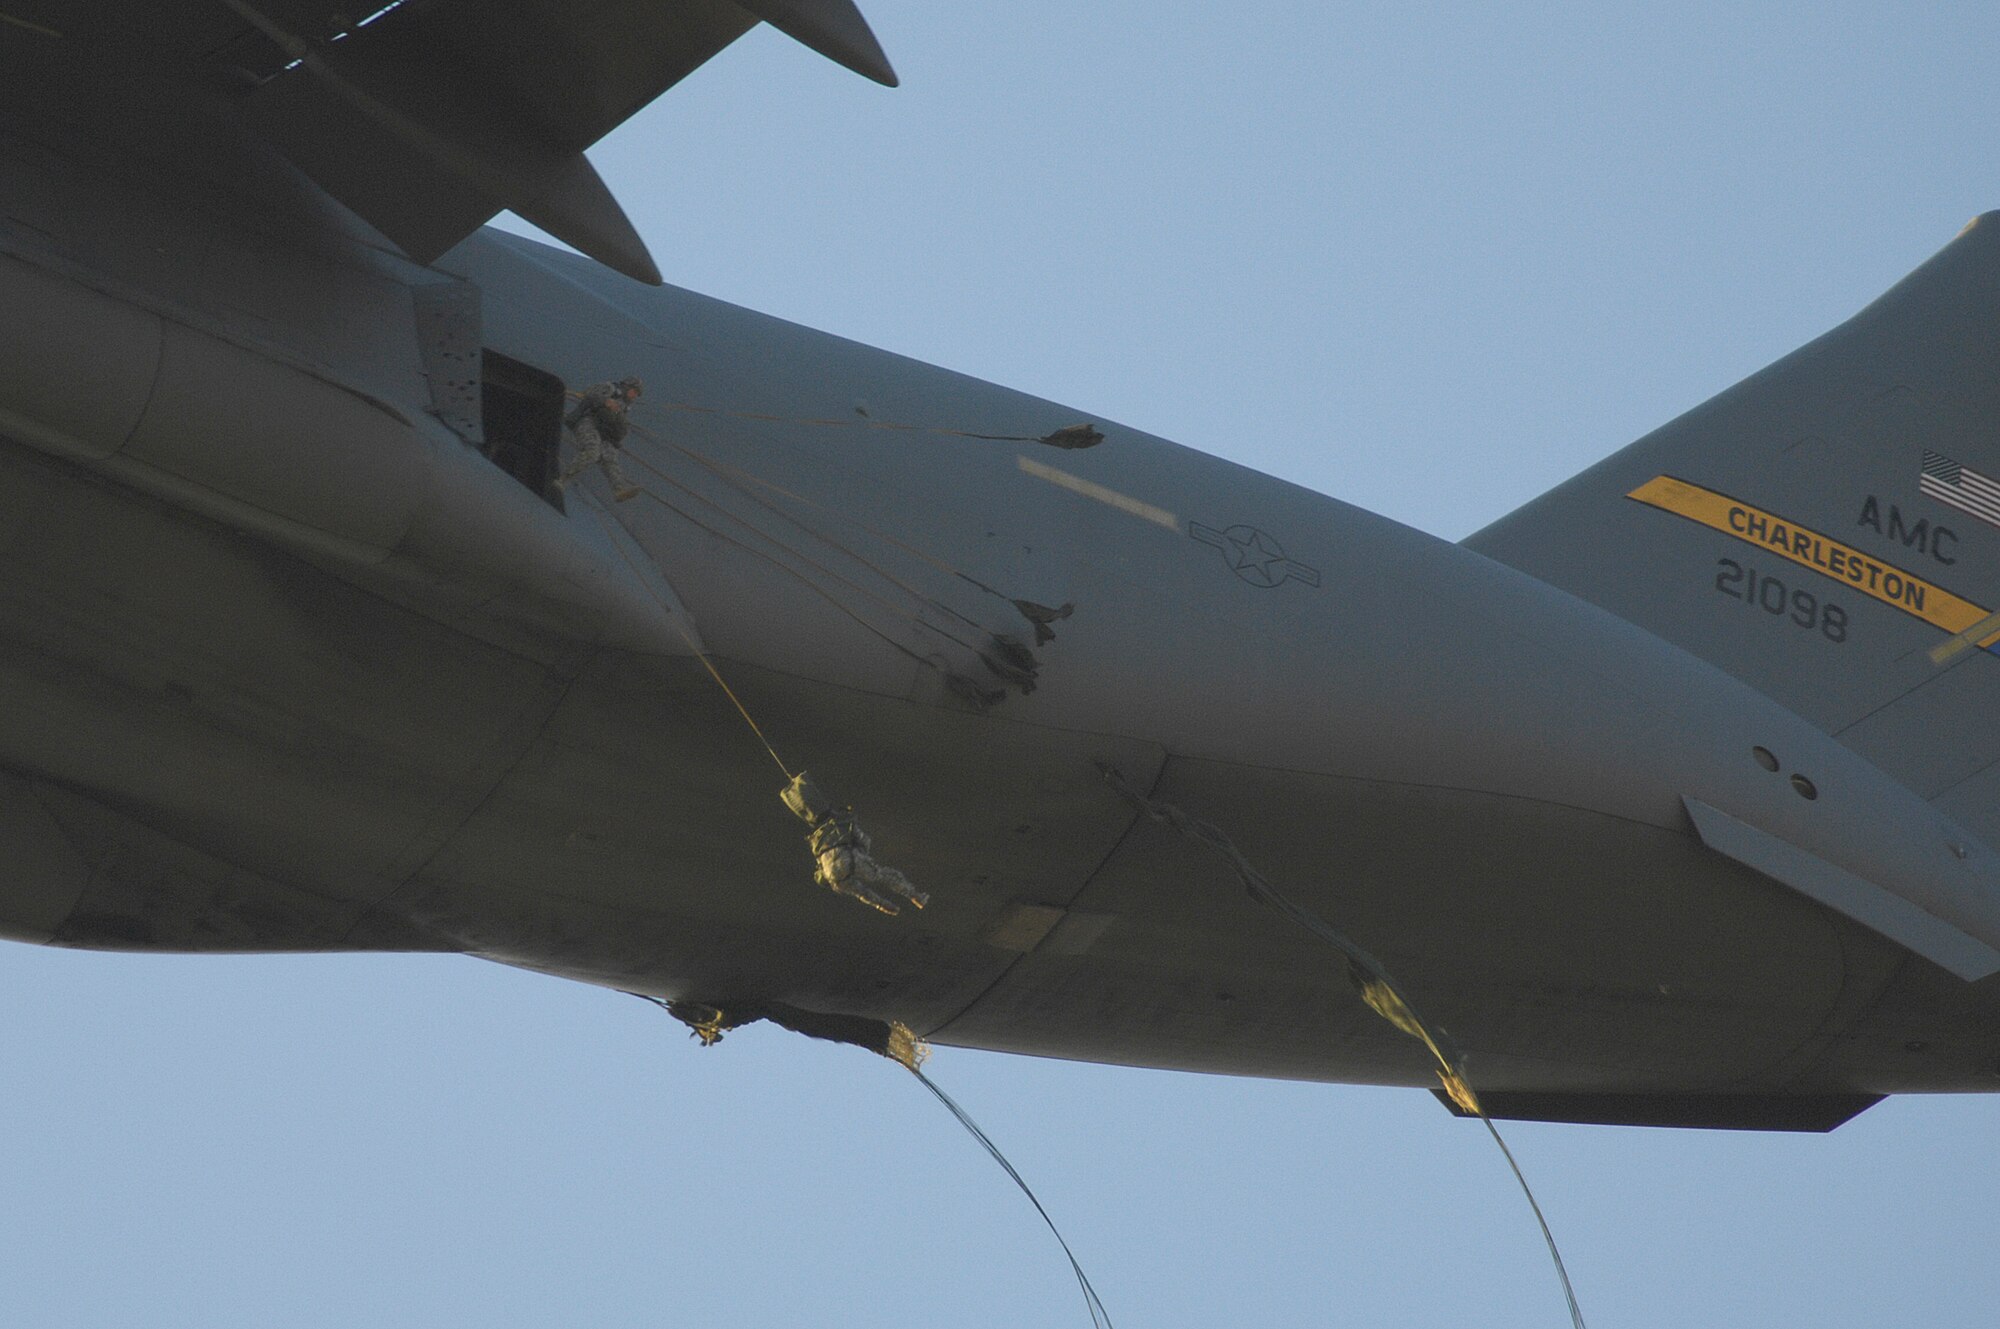 Members of the 505th Parachute Infantry Regiment, 82nd Airborne Division, jump from a Charleston Air Force Base, S.C. C-17 Globemaster III during Joint Forcible Entry Exercise at Pope Air Force Base and Fort Bragg, N.C., on June 18. JFEX is a joint airdrop designed to enhance service cohesiveness between U.S. Army and Air Force personnel allowing both services an opportunity to properly execute large-scale  heavy equipment and troop movement.  (U.S. Air Force photo by Airman 1st Class Daniel Owen)